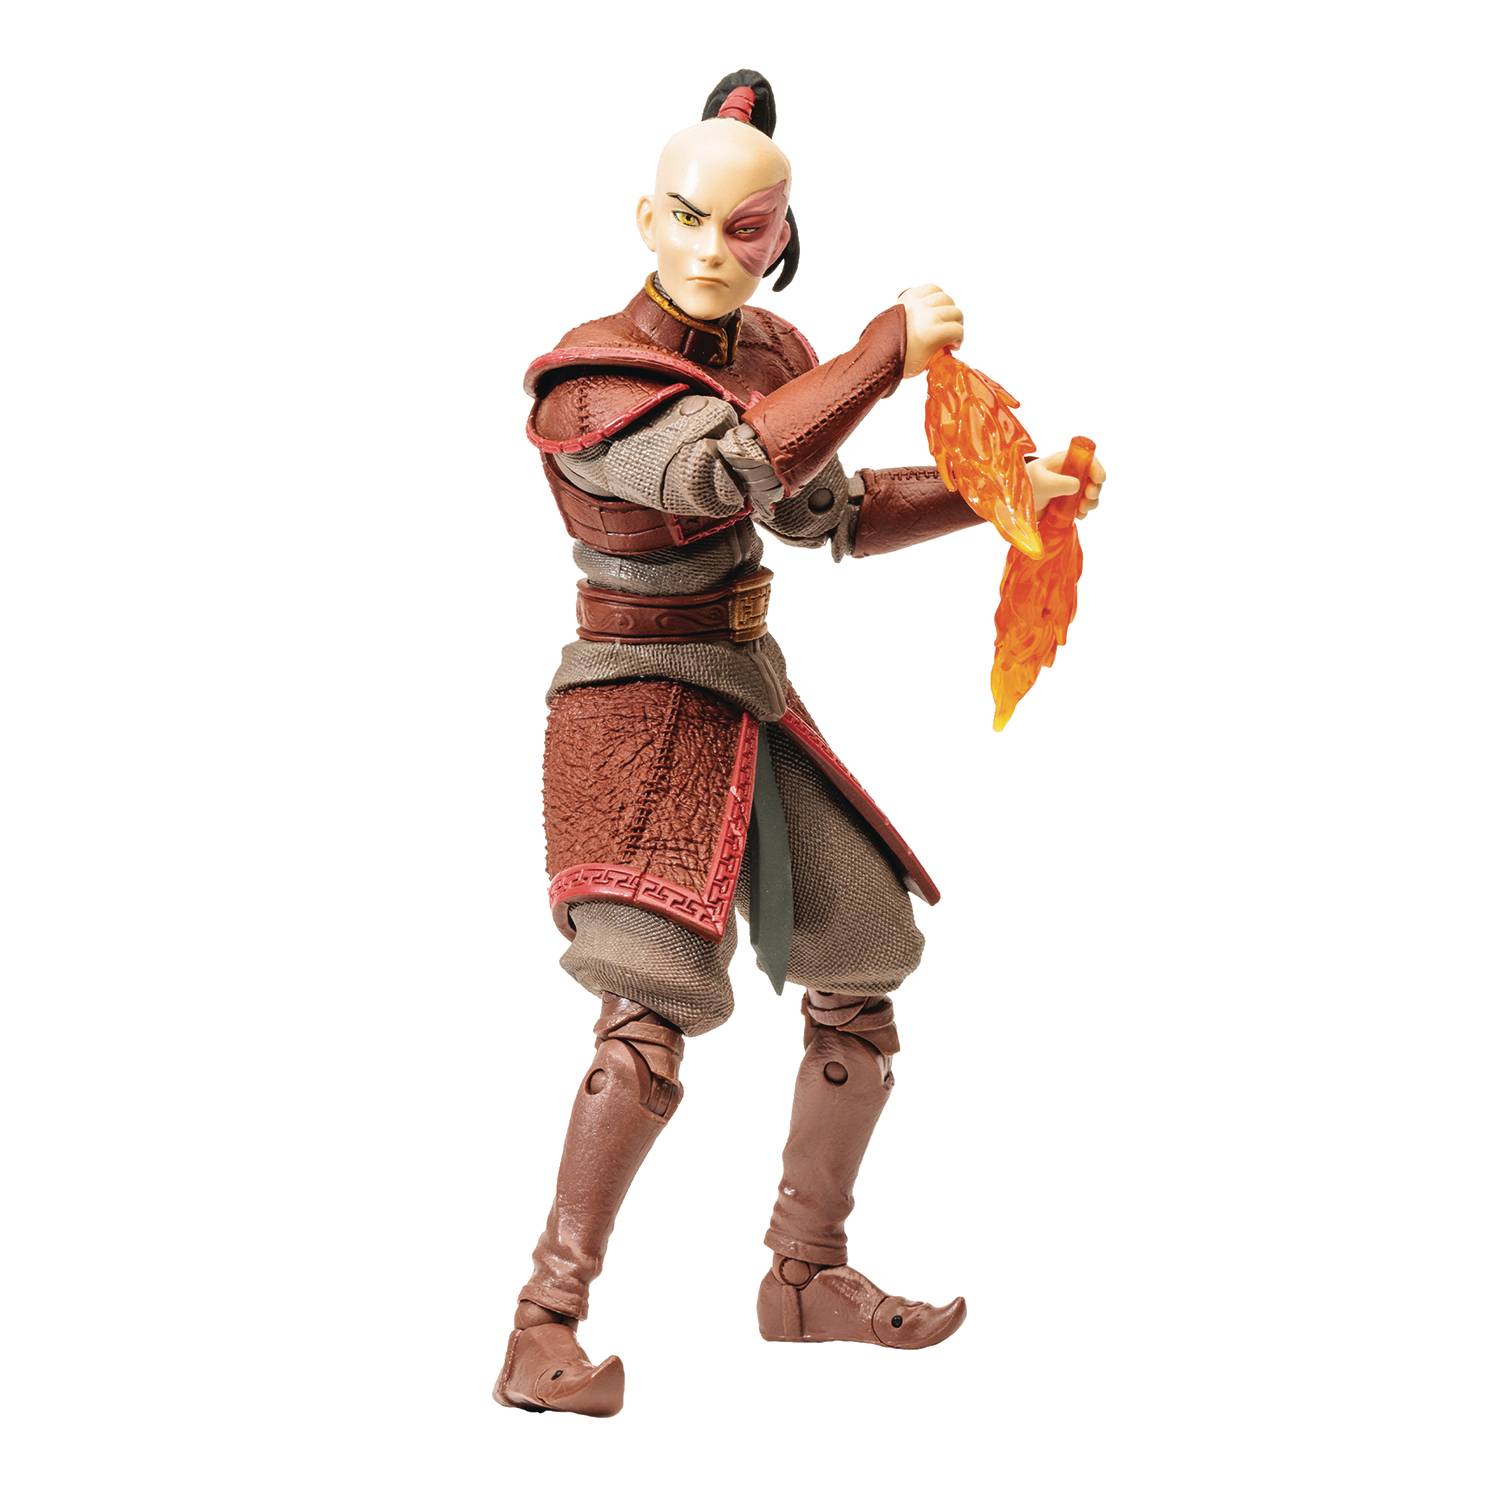 Avatar The Last Air Bender Wave Book 1 Fire Prince Zuko 7 Inch Action Figure